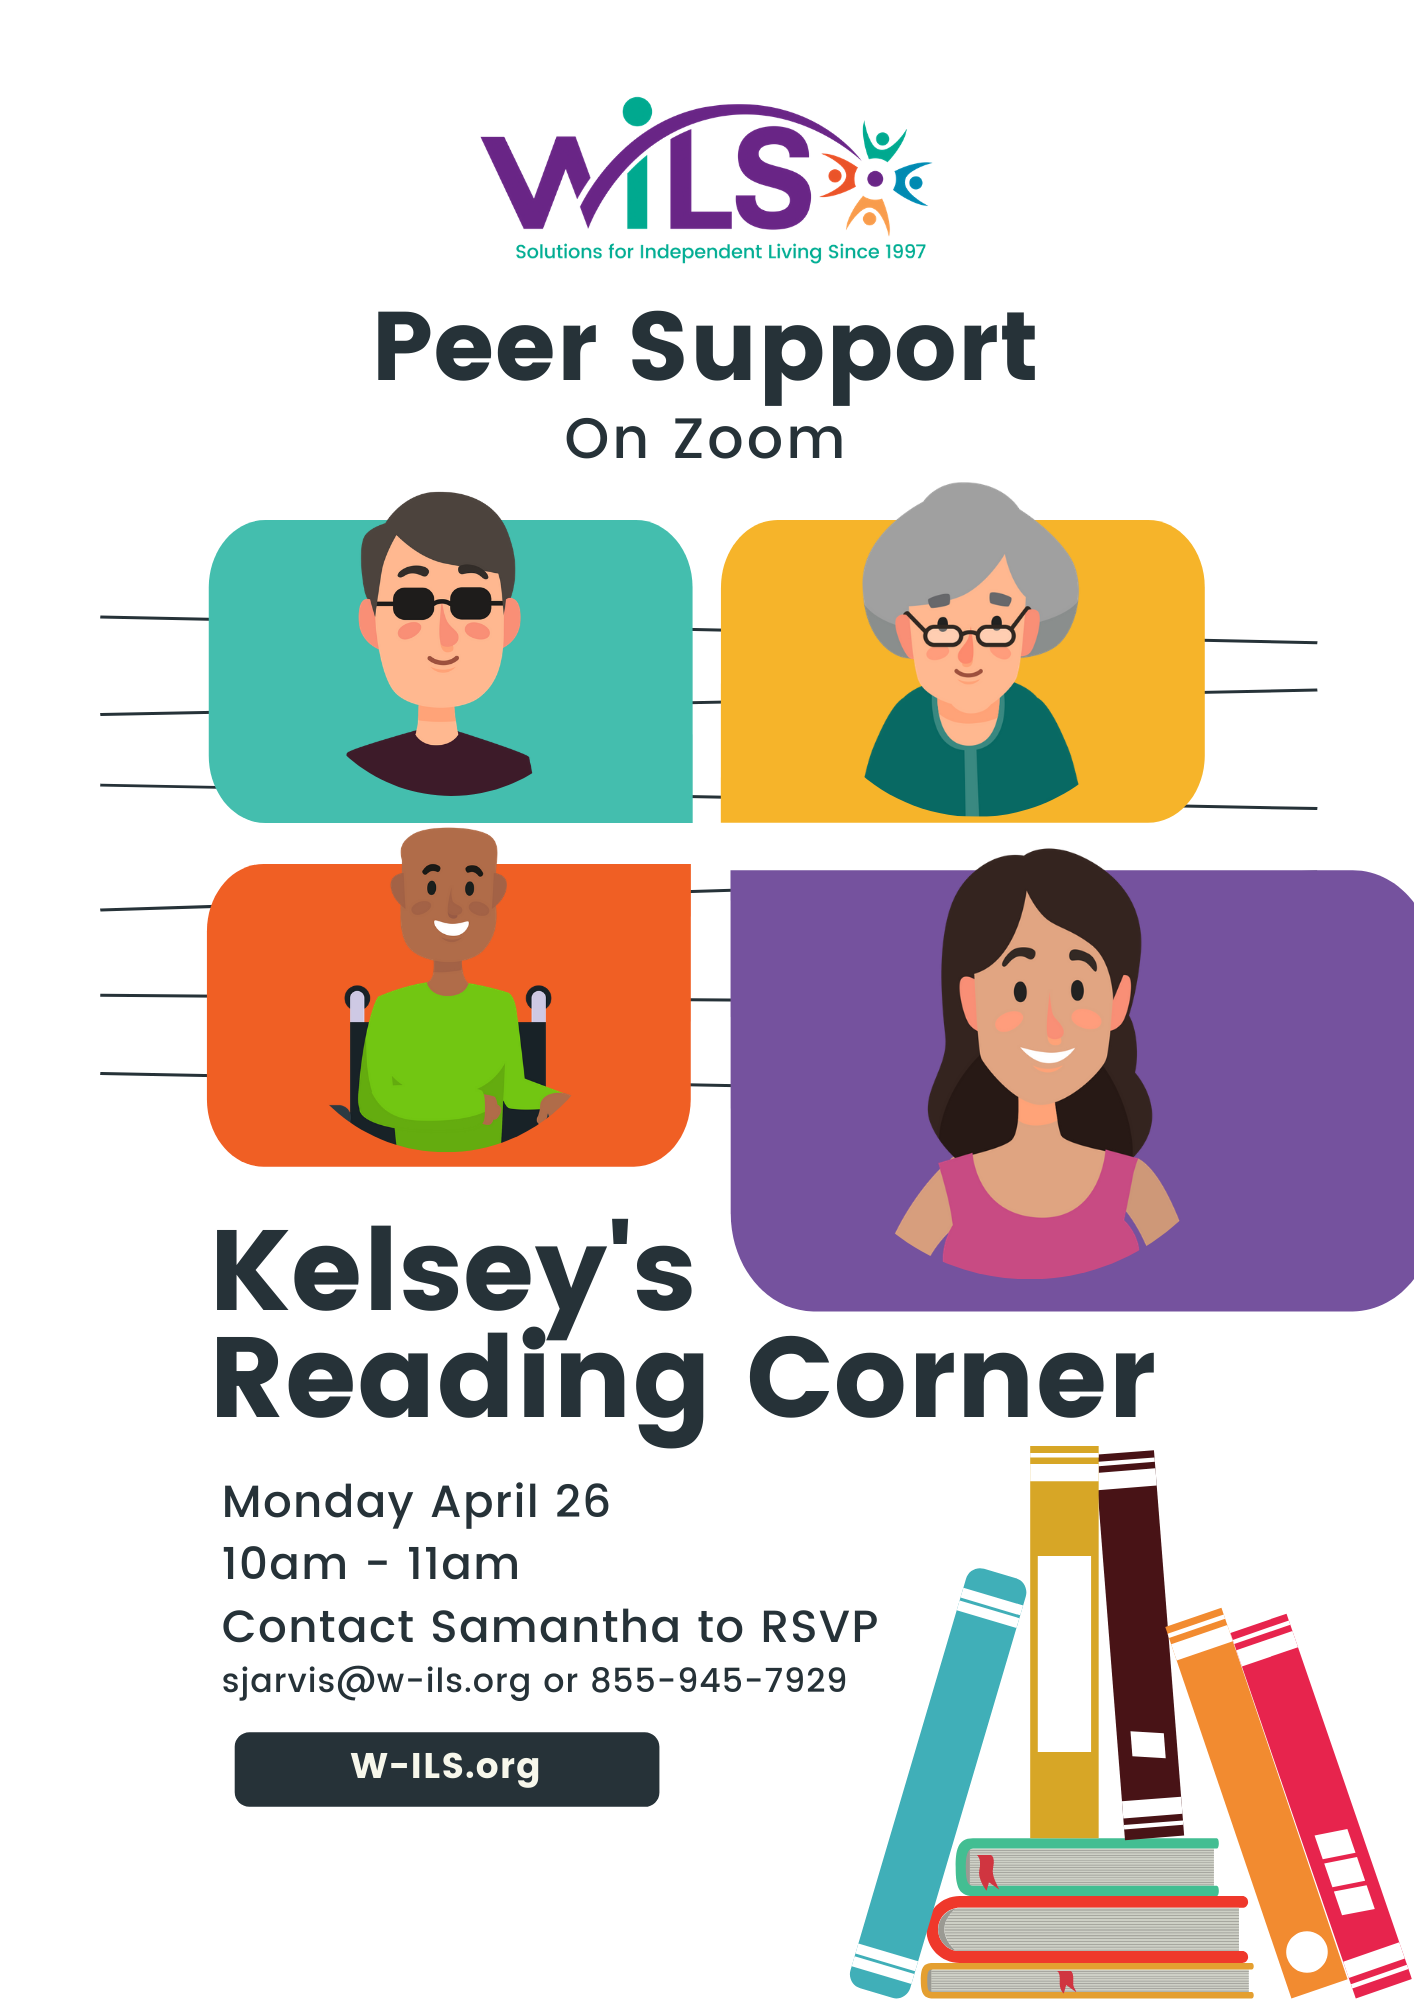 WILS Peer Support on Zoom.  Kelsey's Reading Corner April 26 at 10am.  Contact sjarvis@w-ils.org for zoom details.